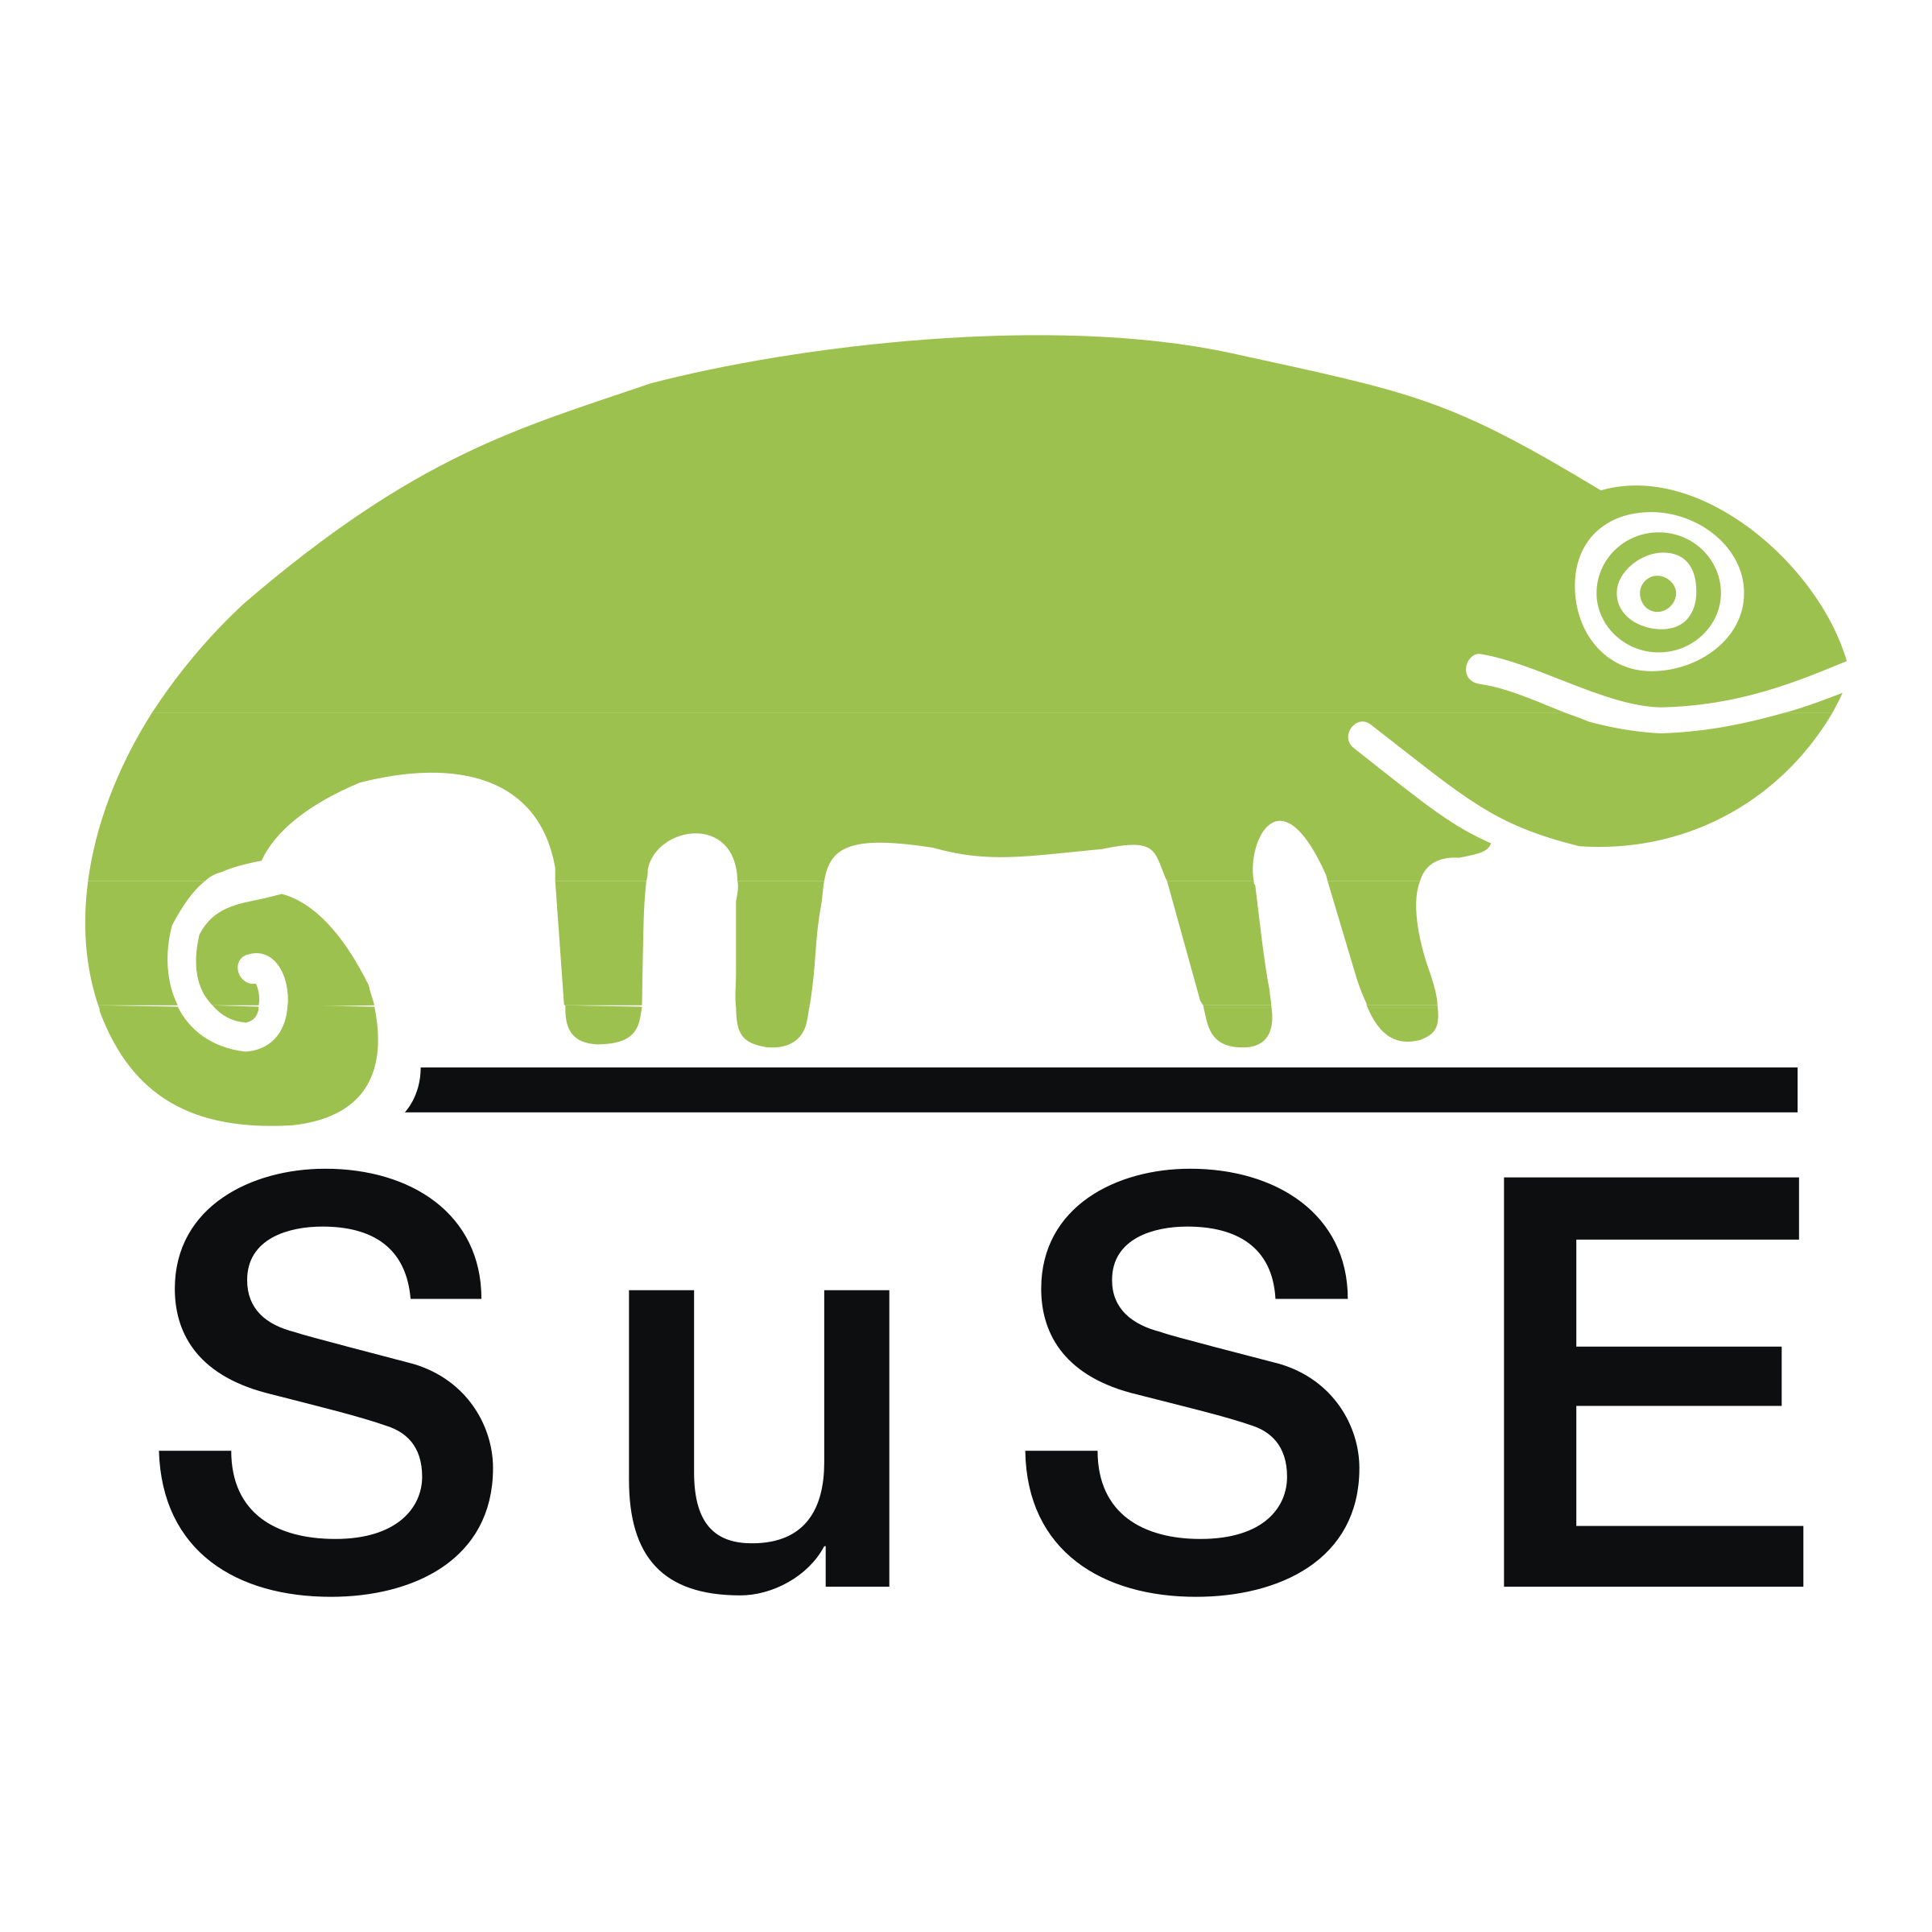 Opensuse Distributions Suse Linux HQ Image Free PNG PNG Image